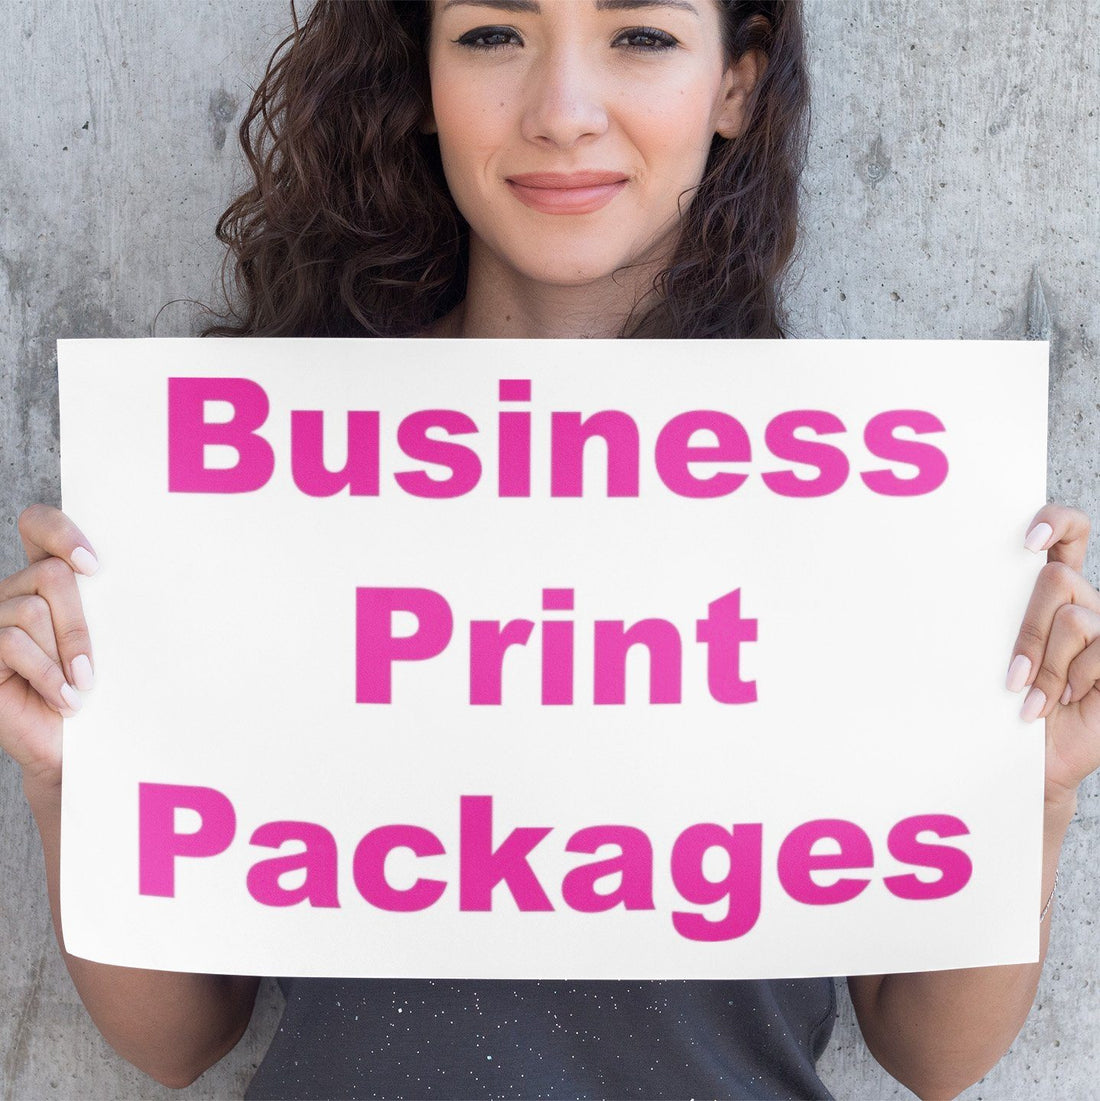 Business Print Packages